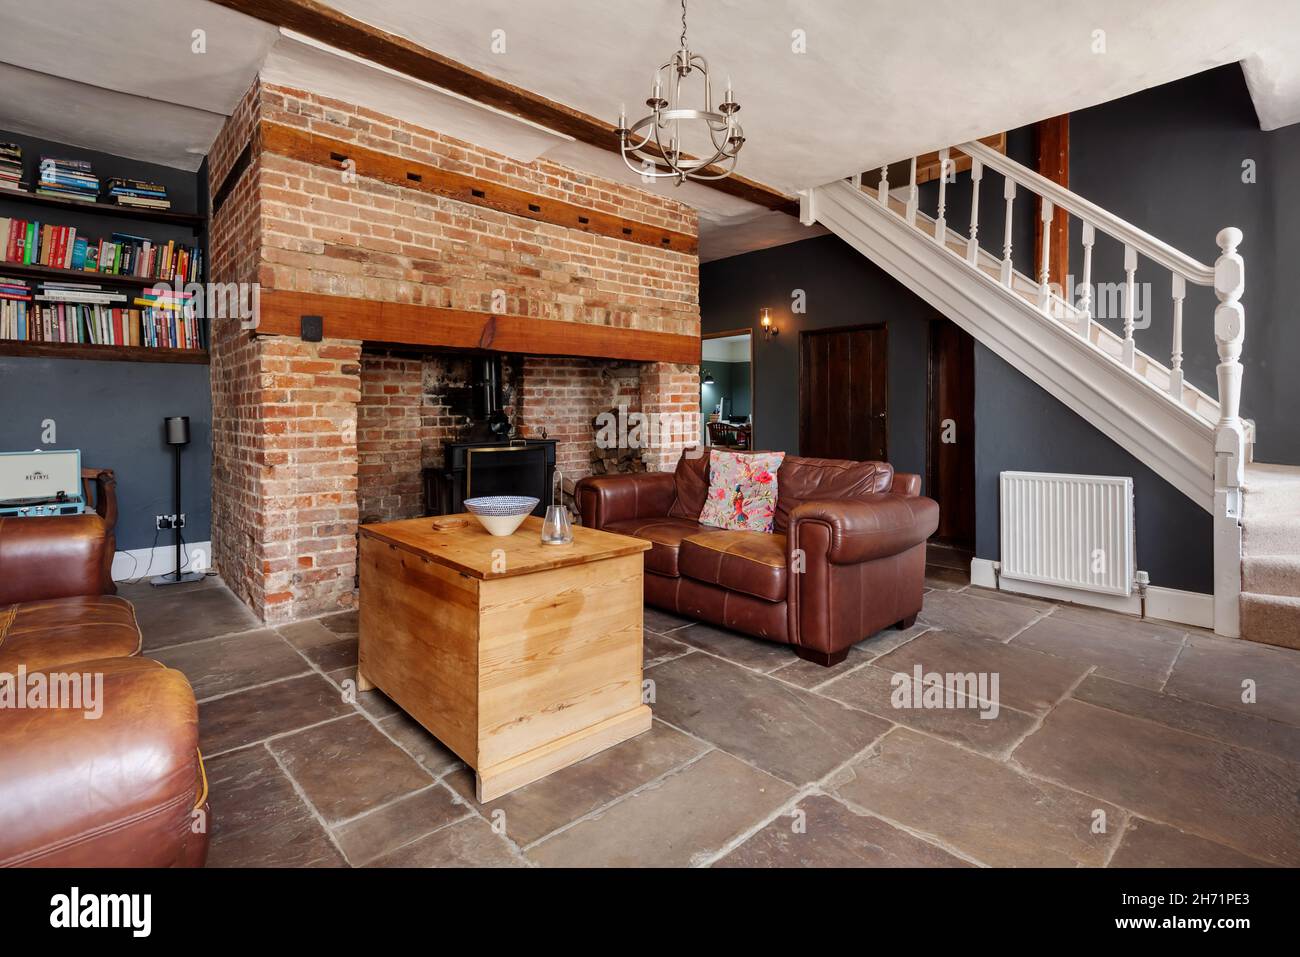 Ashdon, England  - July 25 2019: traditional farmhouse living room inside British home with large exposed brick inglenook fireplace and stone floor Stock Photo